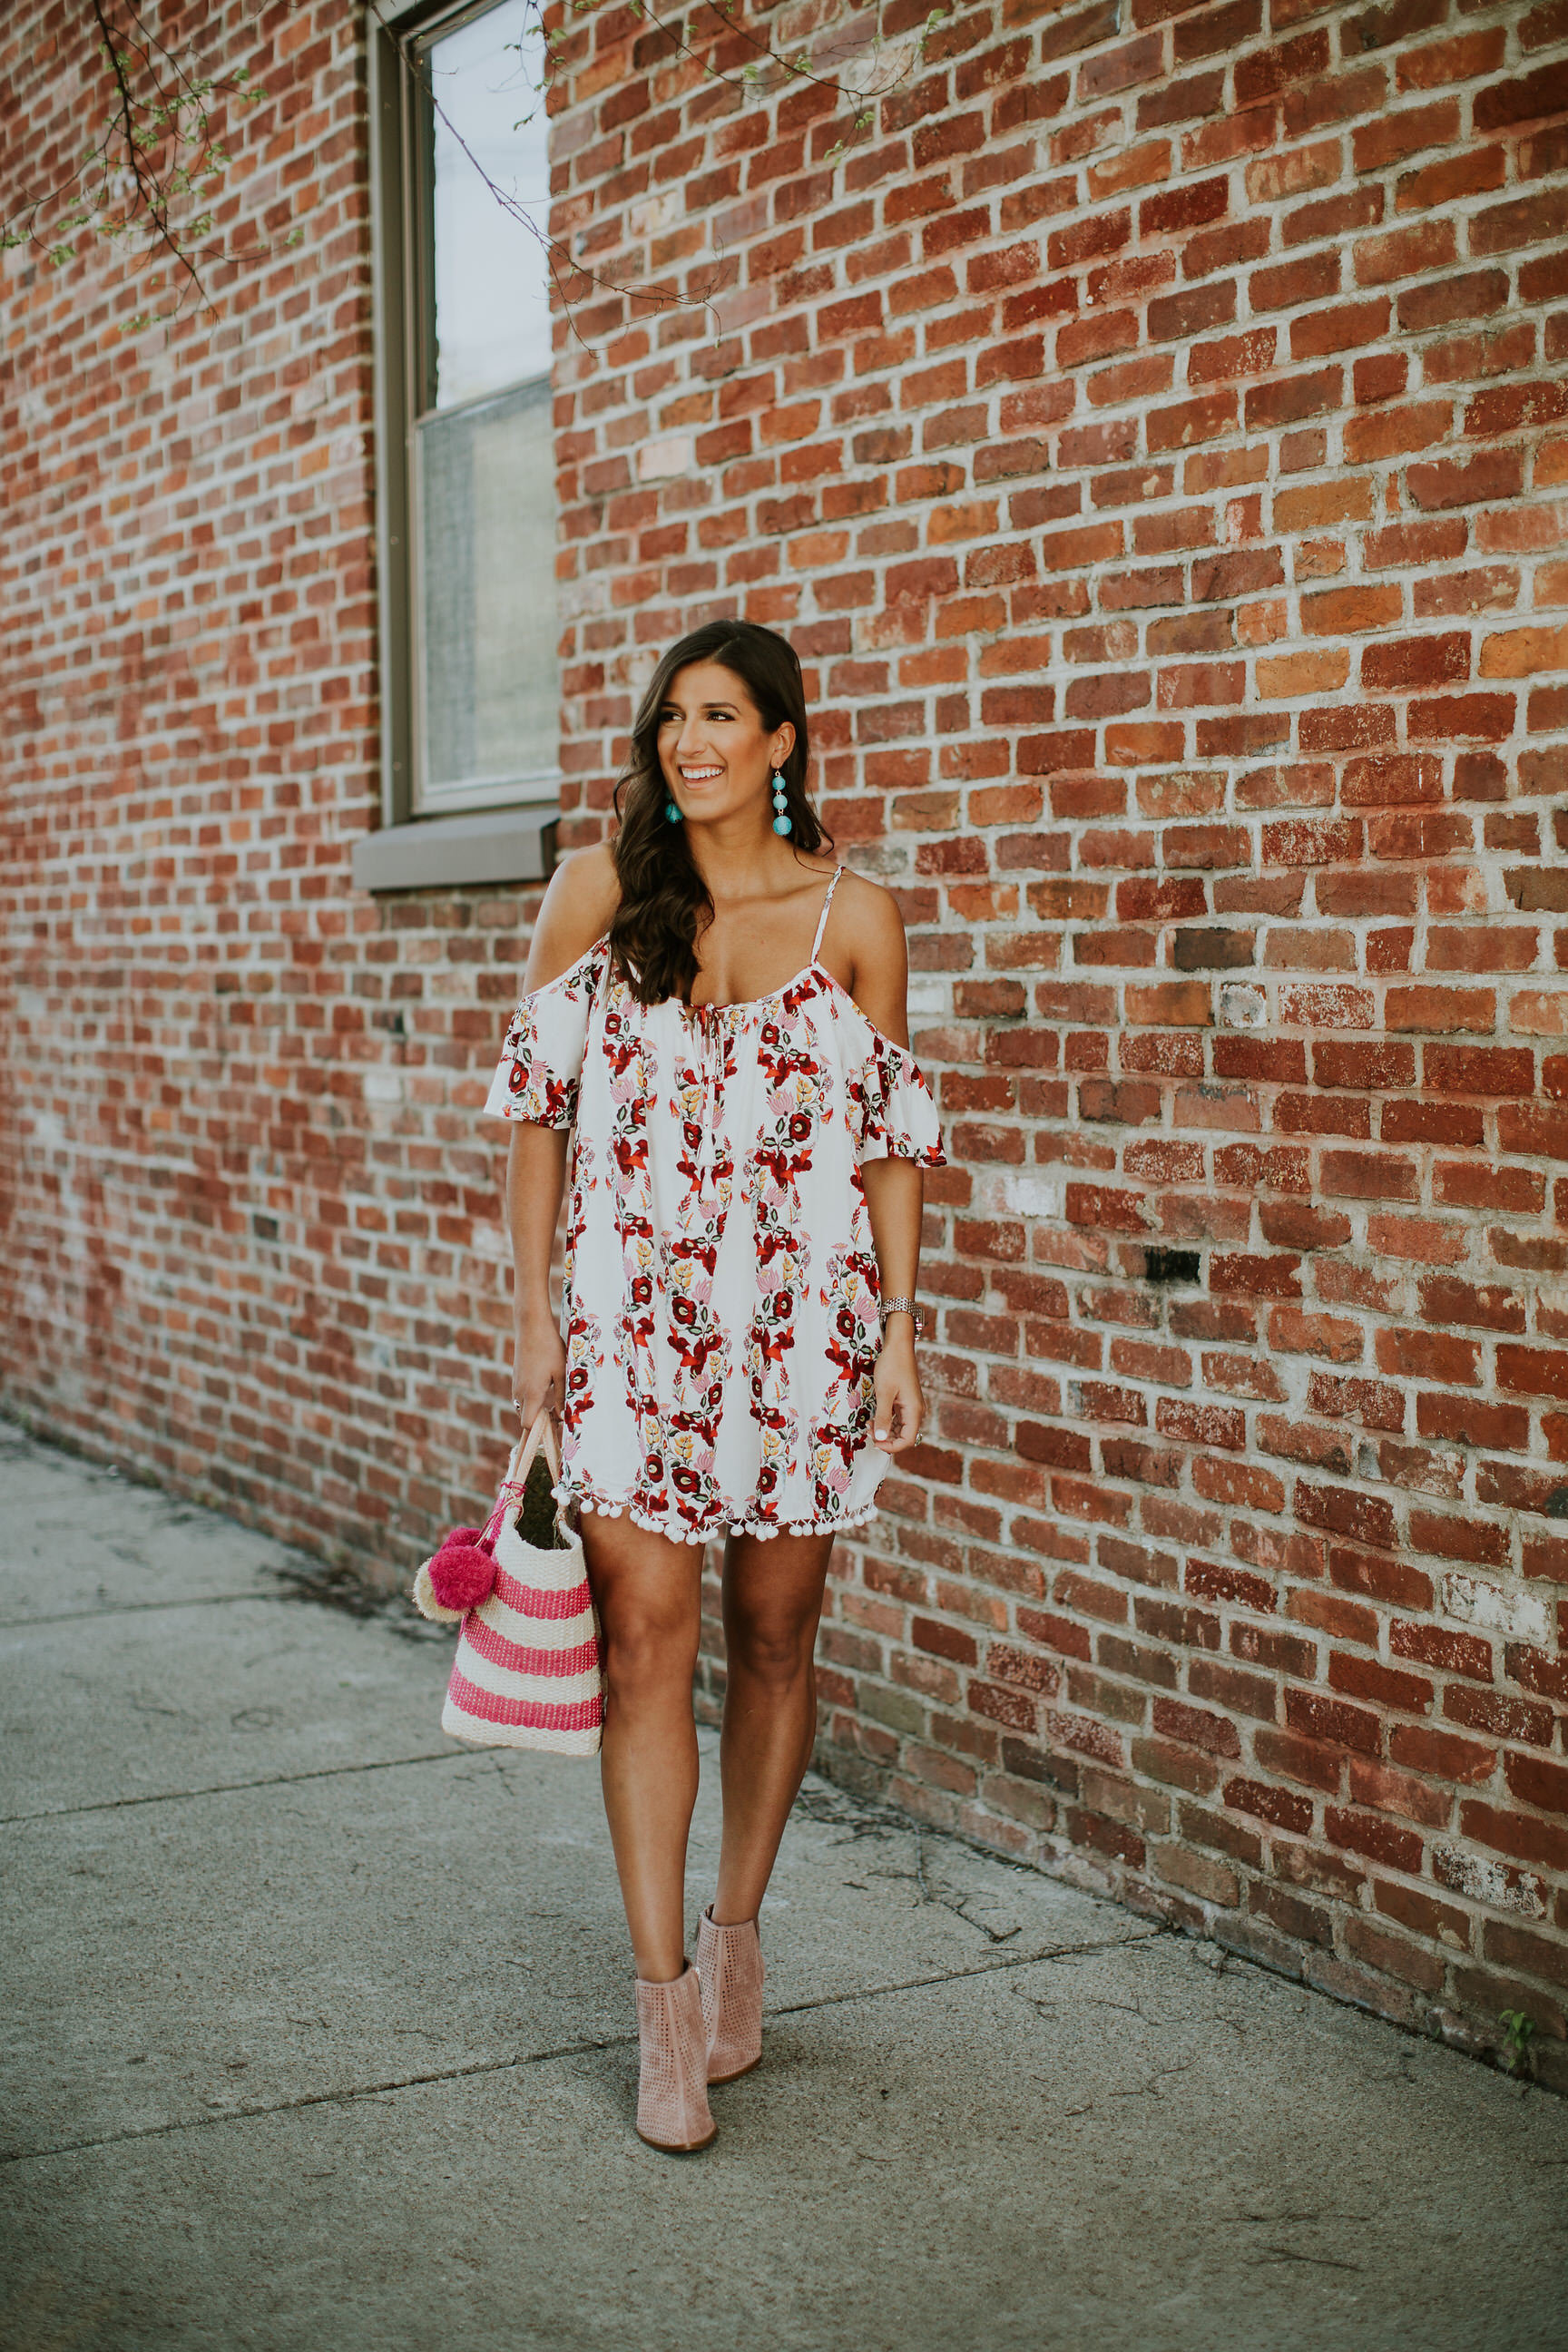 pom pom dress, cold shoulder dress, show me your mumu bonaroo dress, show me your mumu dresses, vacation dress, vacation fashion, vacation style, turquoise earrings, baublebar crispin drops, mar y sol collins tote, straw tote, straw beach tote, perforated booties, summer fashion, summer outfit ideas, southern fashion blogger, kentucky blogger // grace wainwright a southern drawl